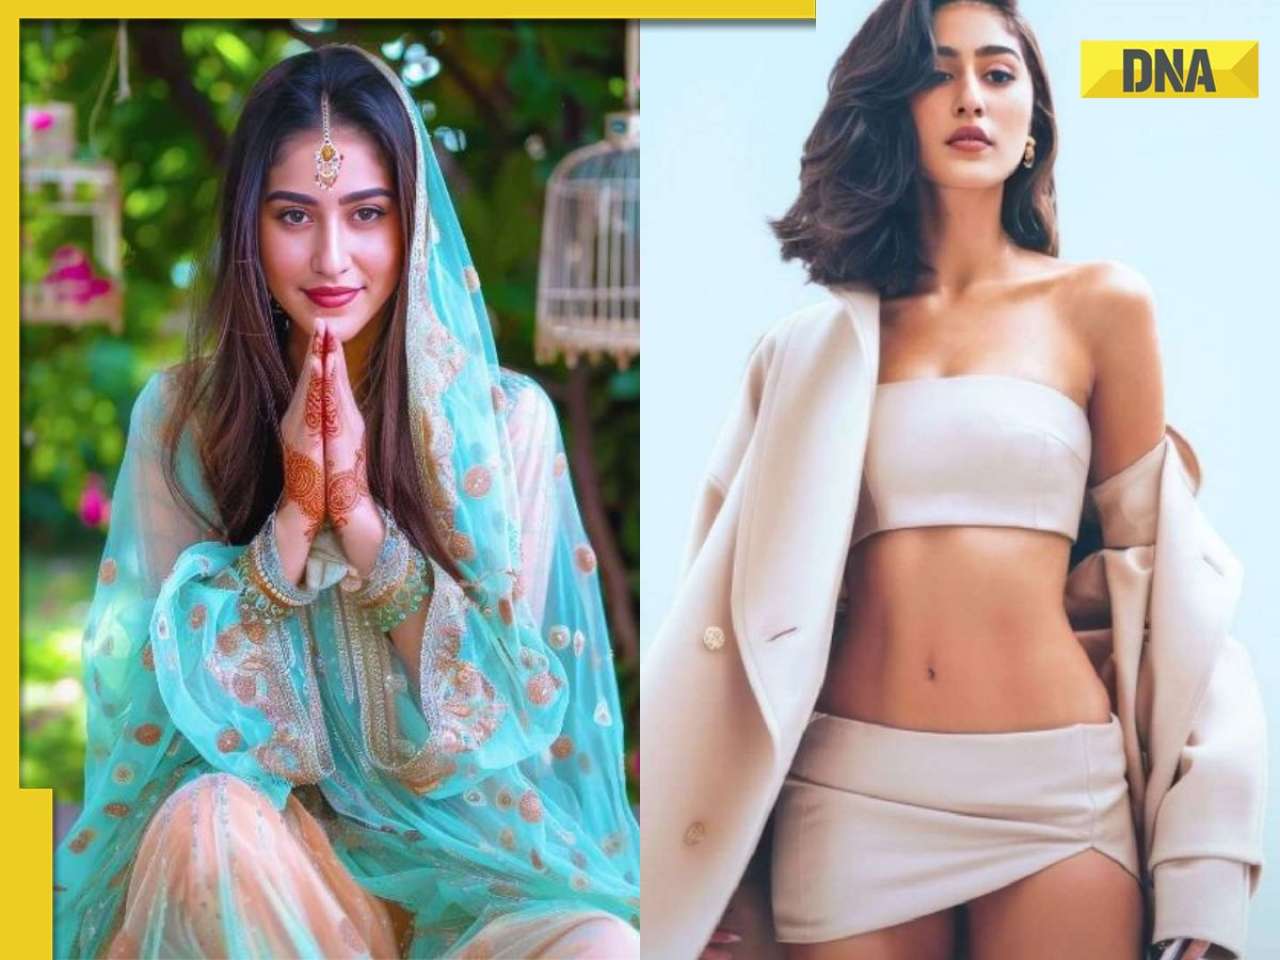 Who is Zara Sharavari, what's her connection with India and why is she trending on internet?